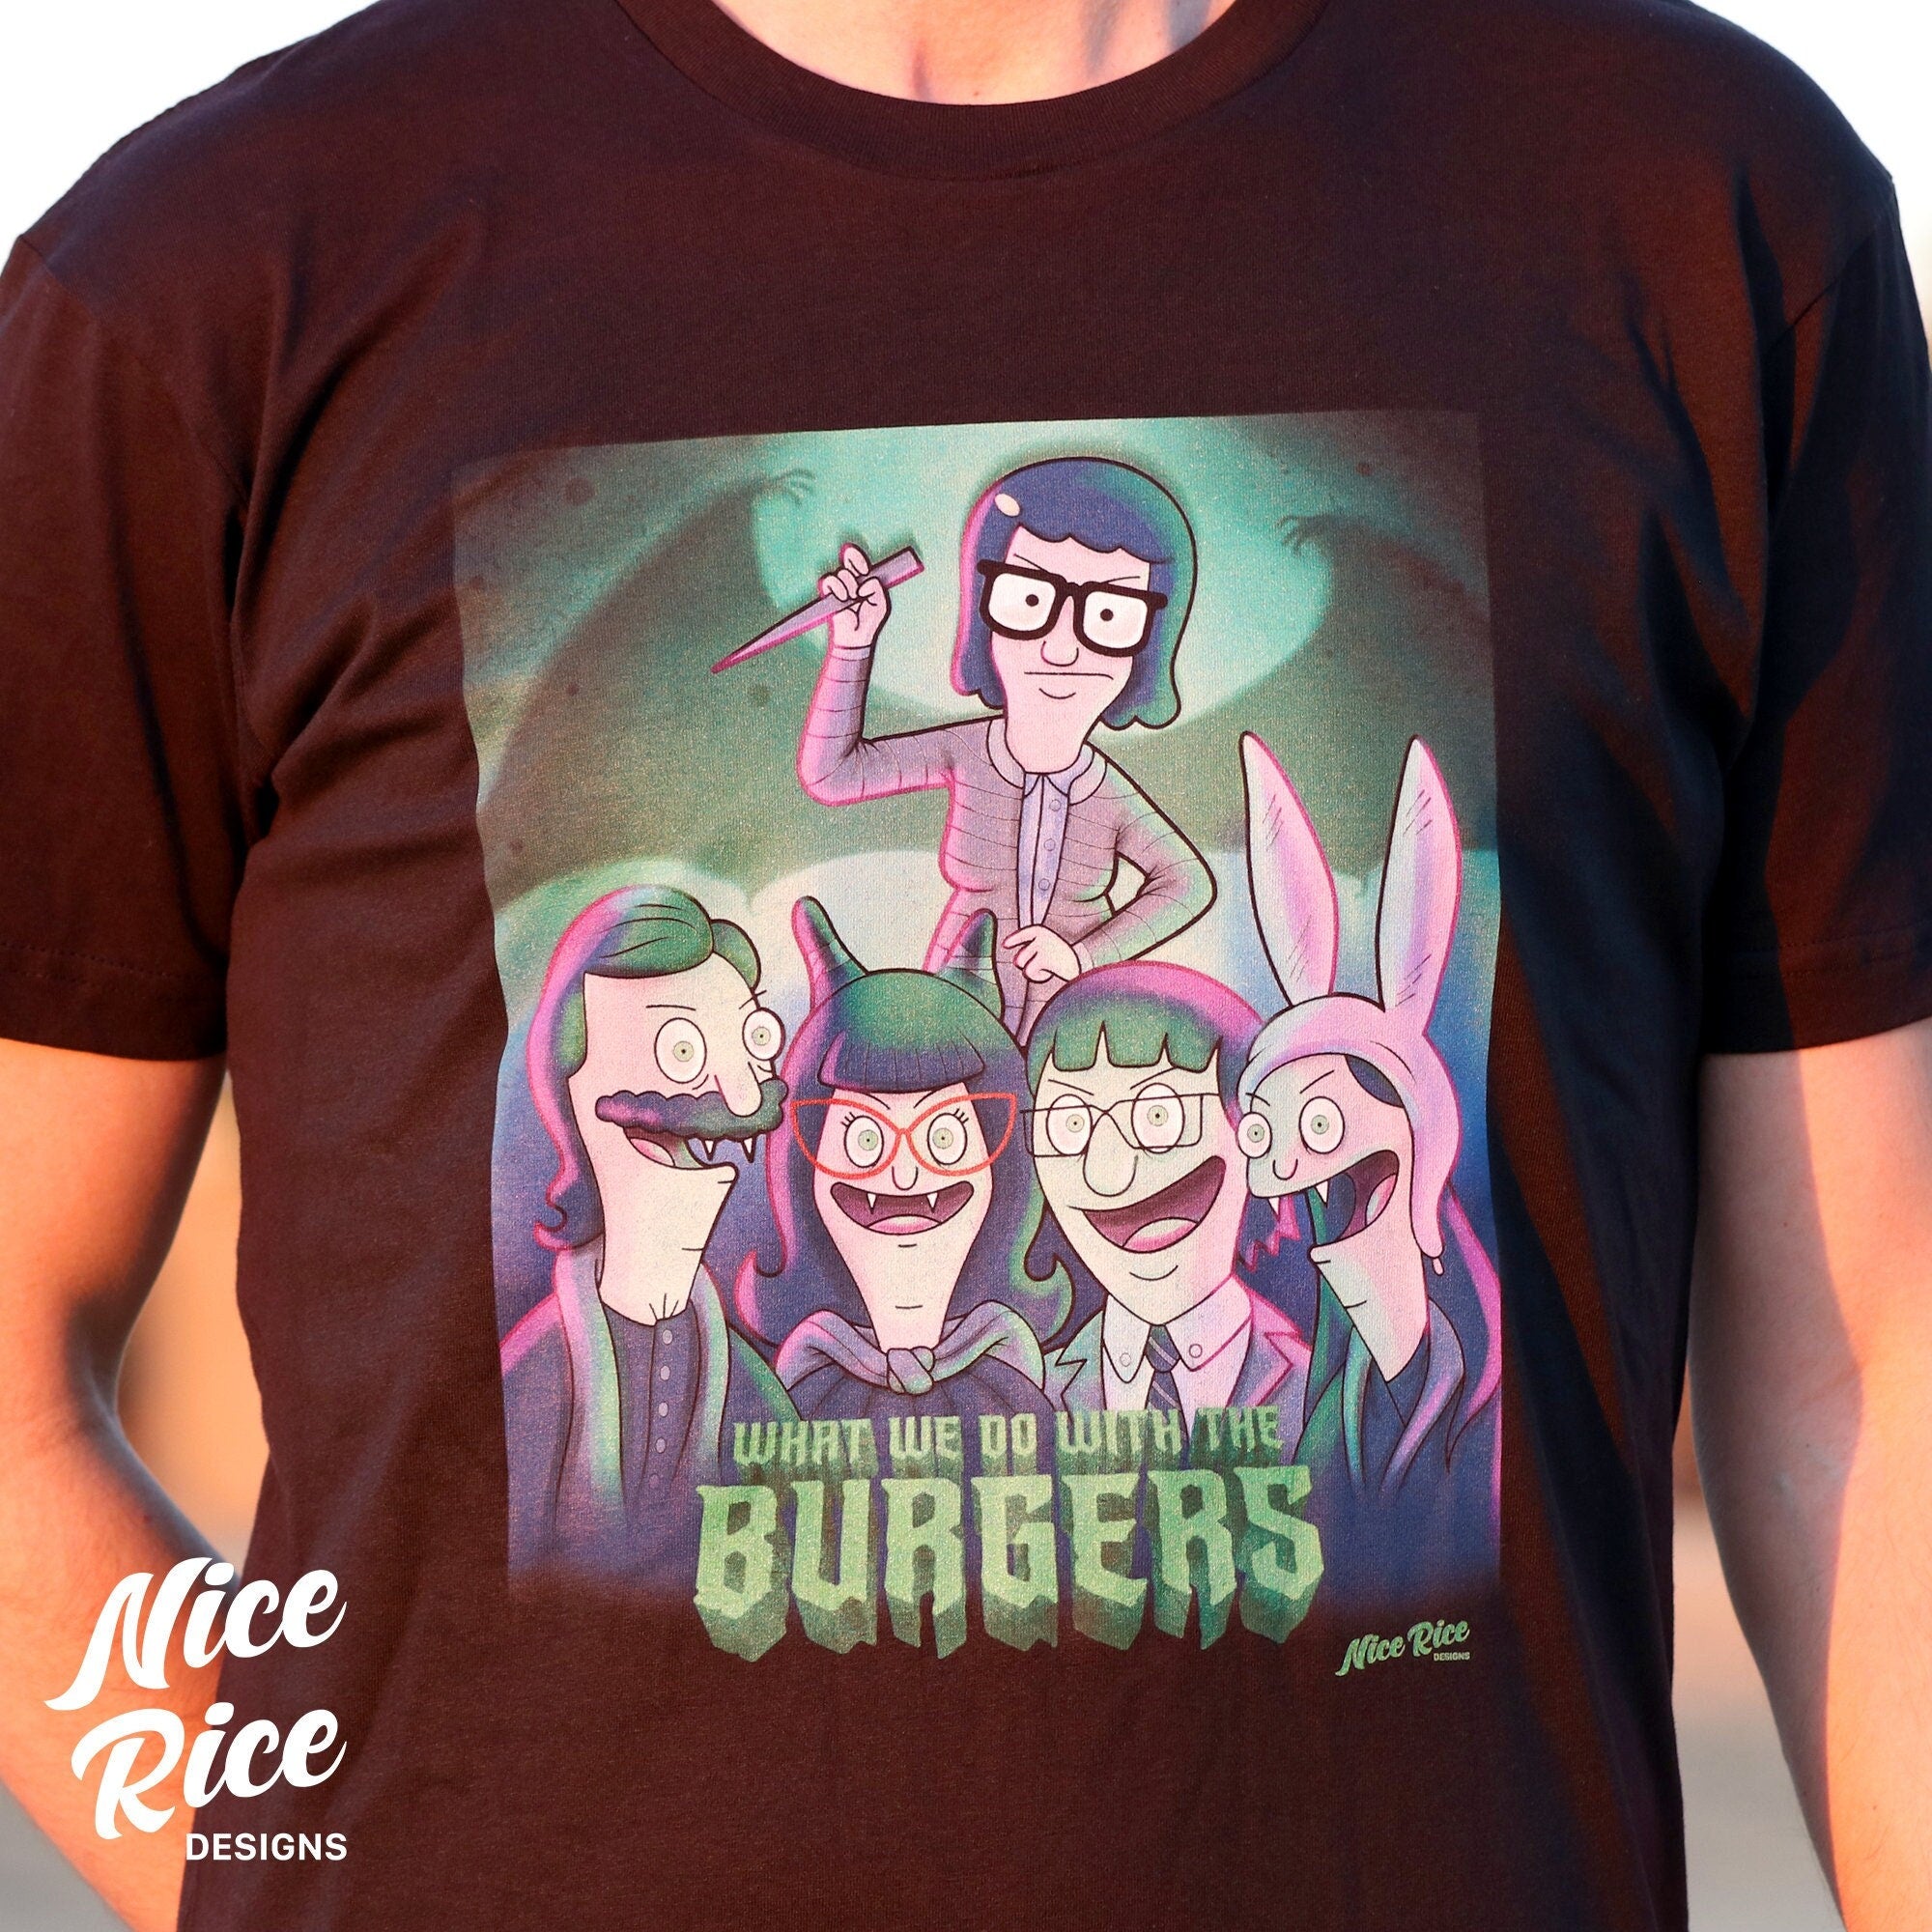 What We Do With the Burgers Shirt by Nice Rice Designs